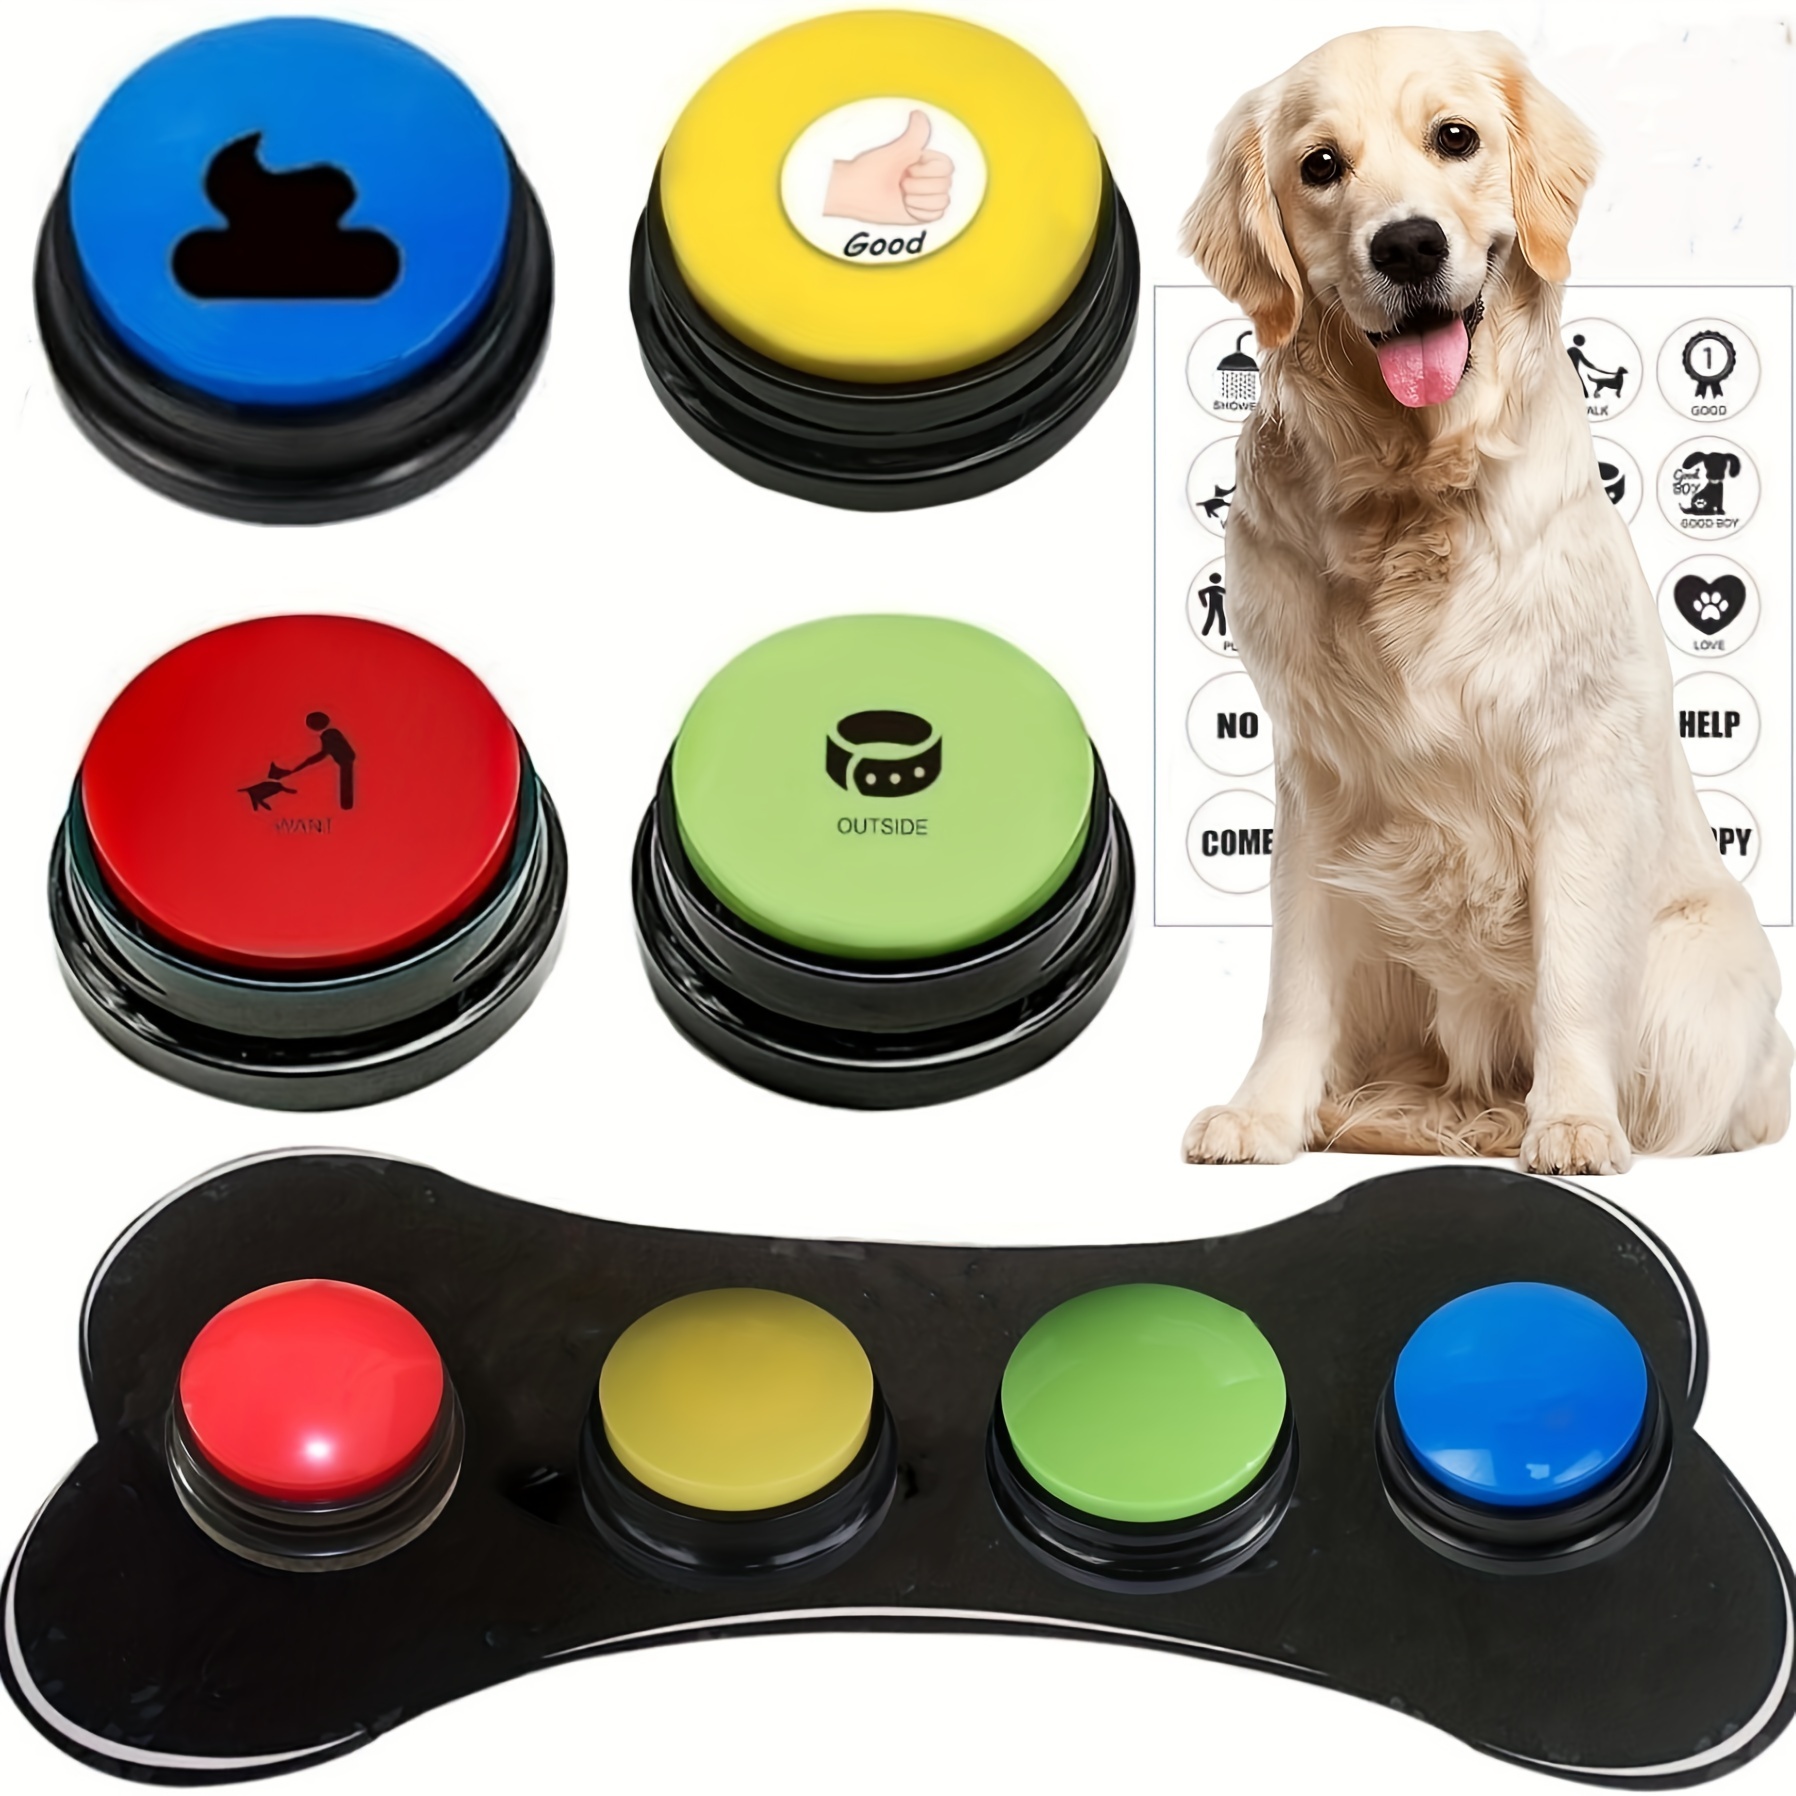 Funny NO Button - Yes Maybe or Sorry Button - QUANTITY DISCOUNTS - FREE GIFT